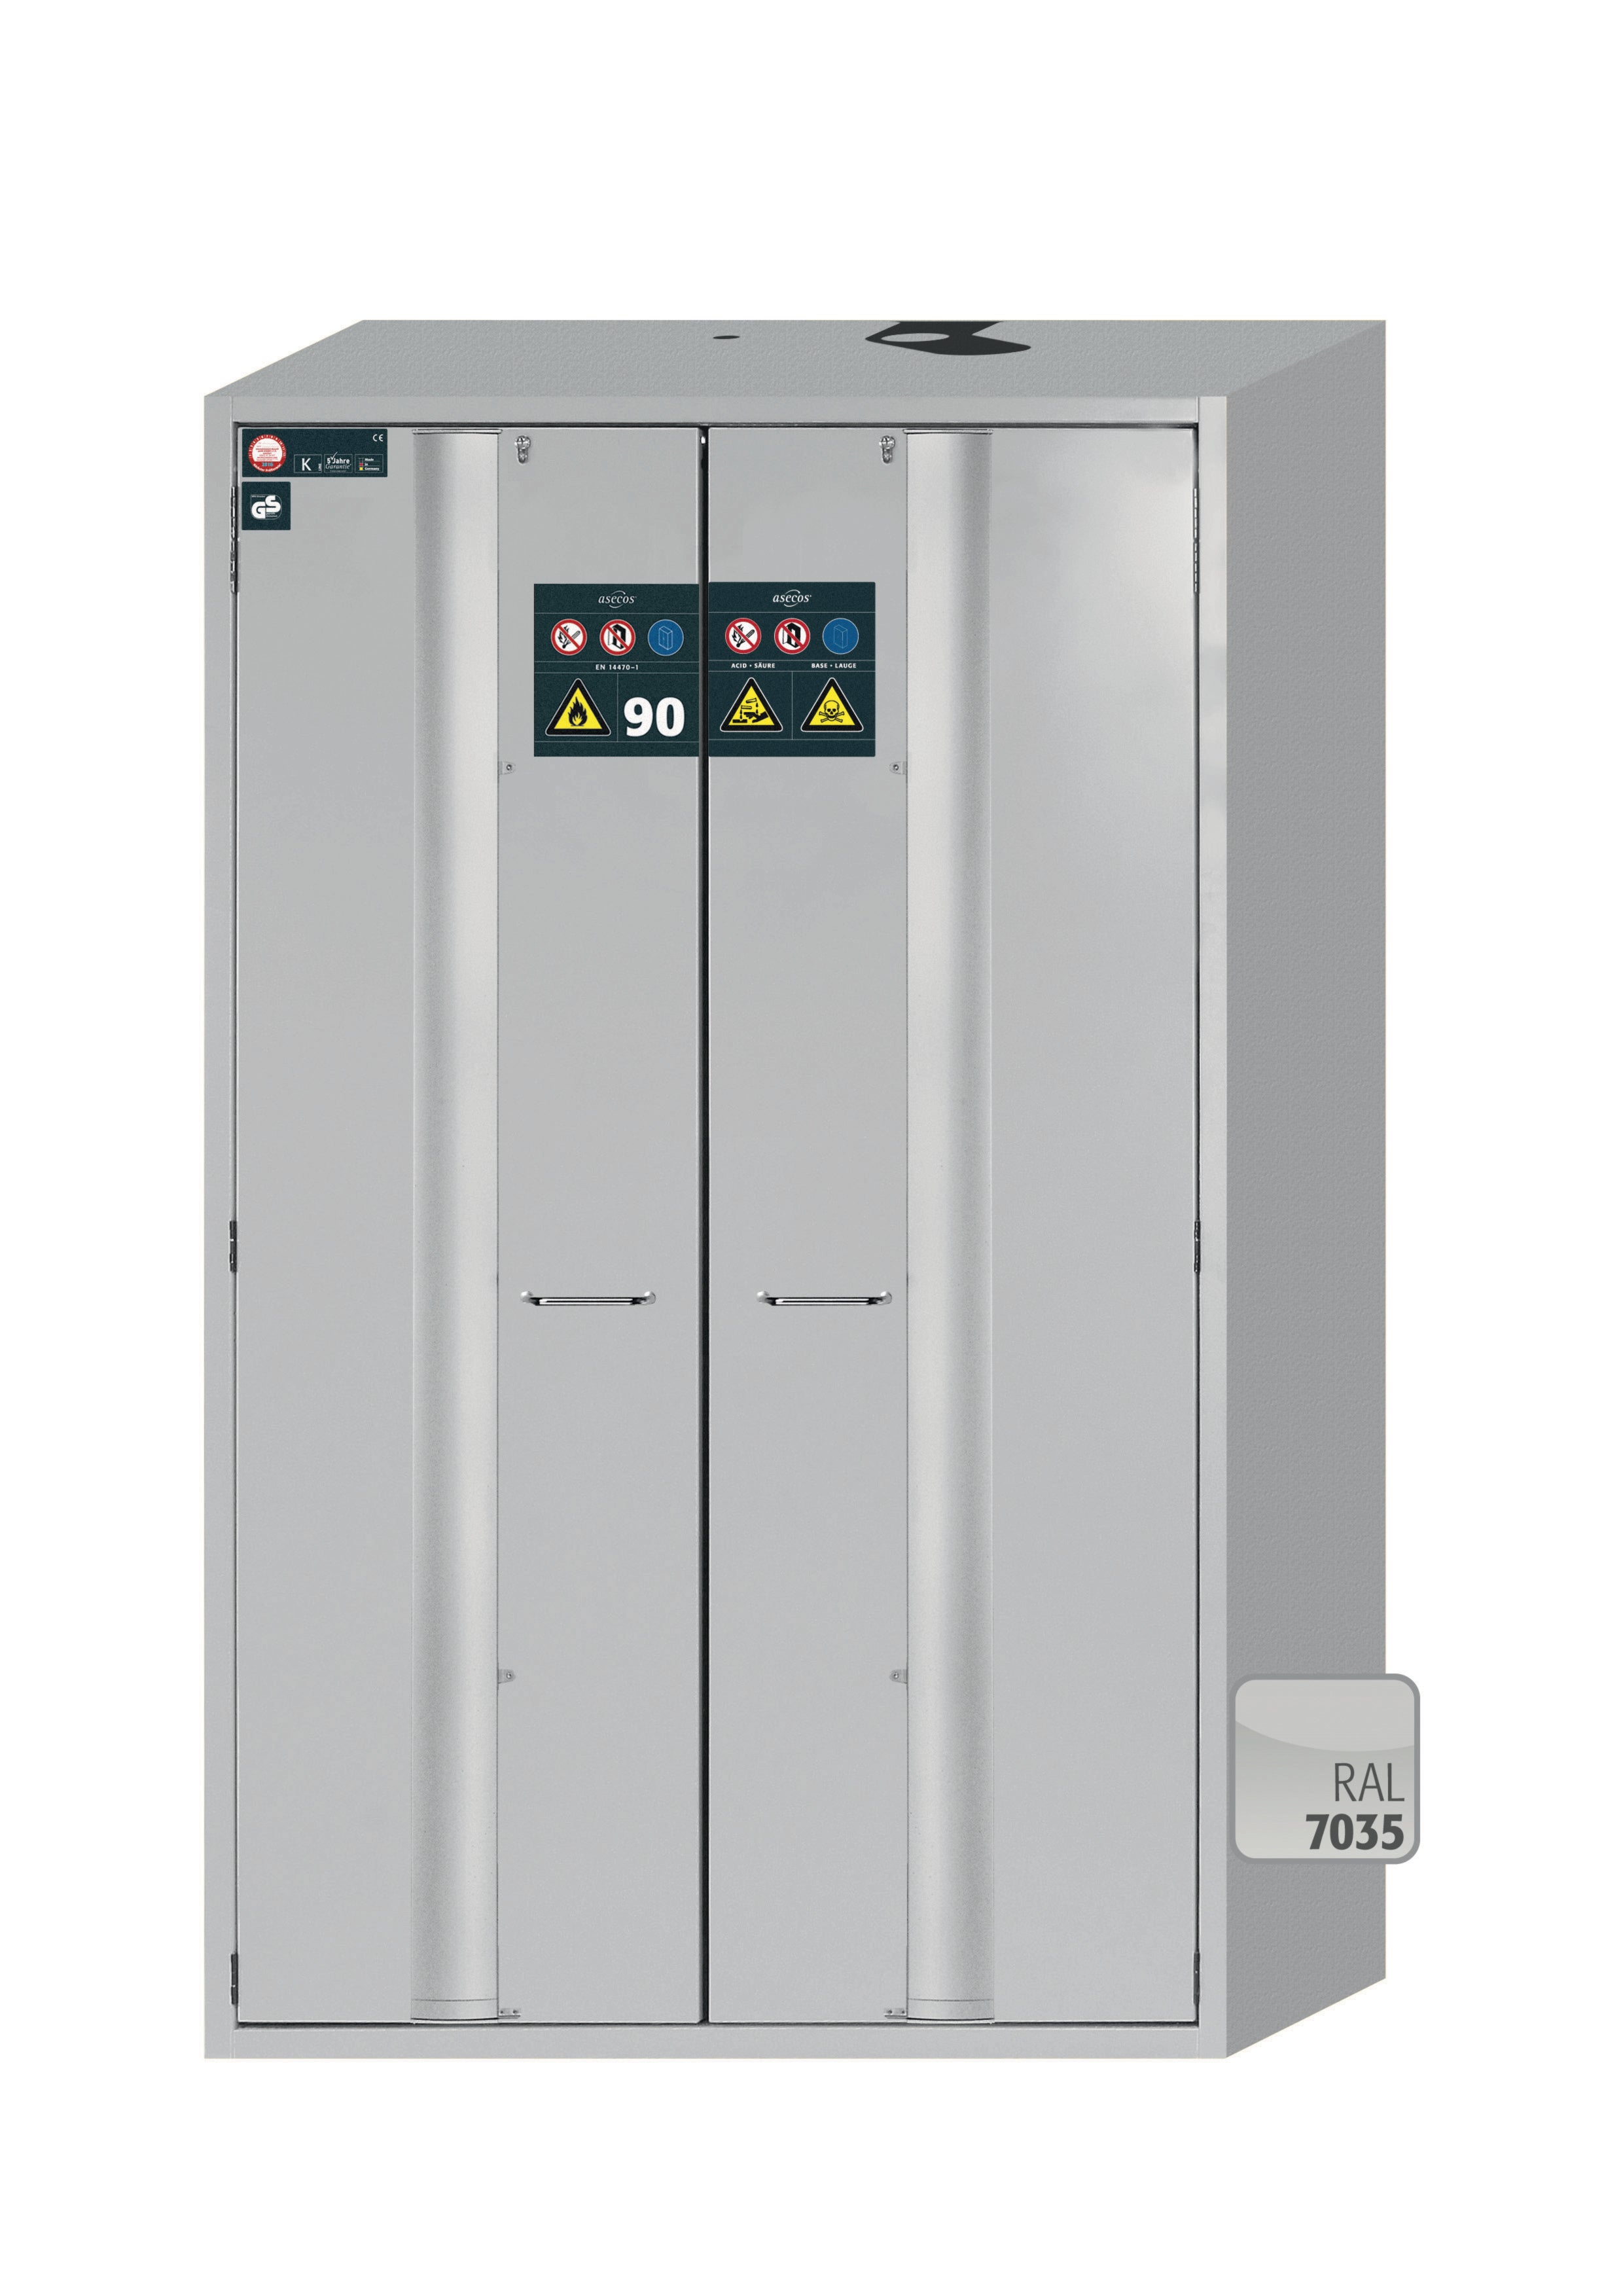 Type 90 safety cabinet S-PHOENIX-90 model S90.196.120.MV.FDAS in light gray RAL 7035 with 6x standard pull-out tray (stainless steel 1.4301)